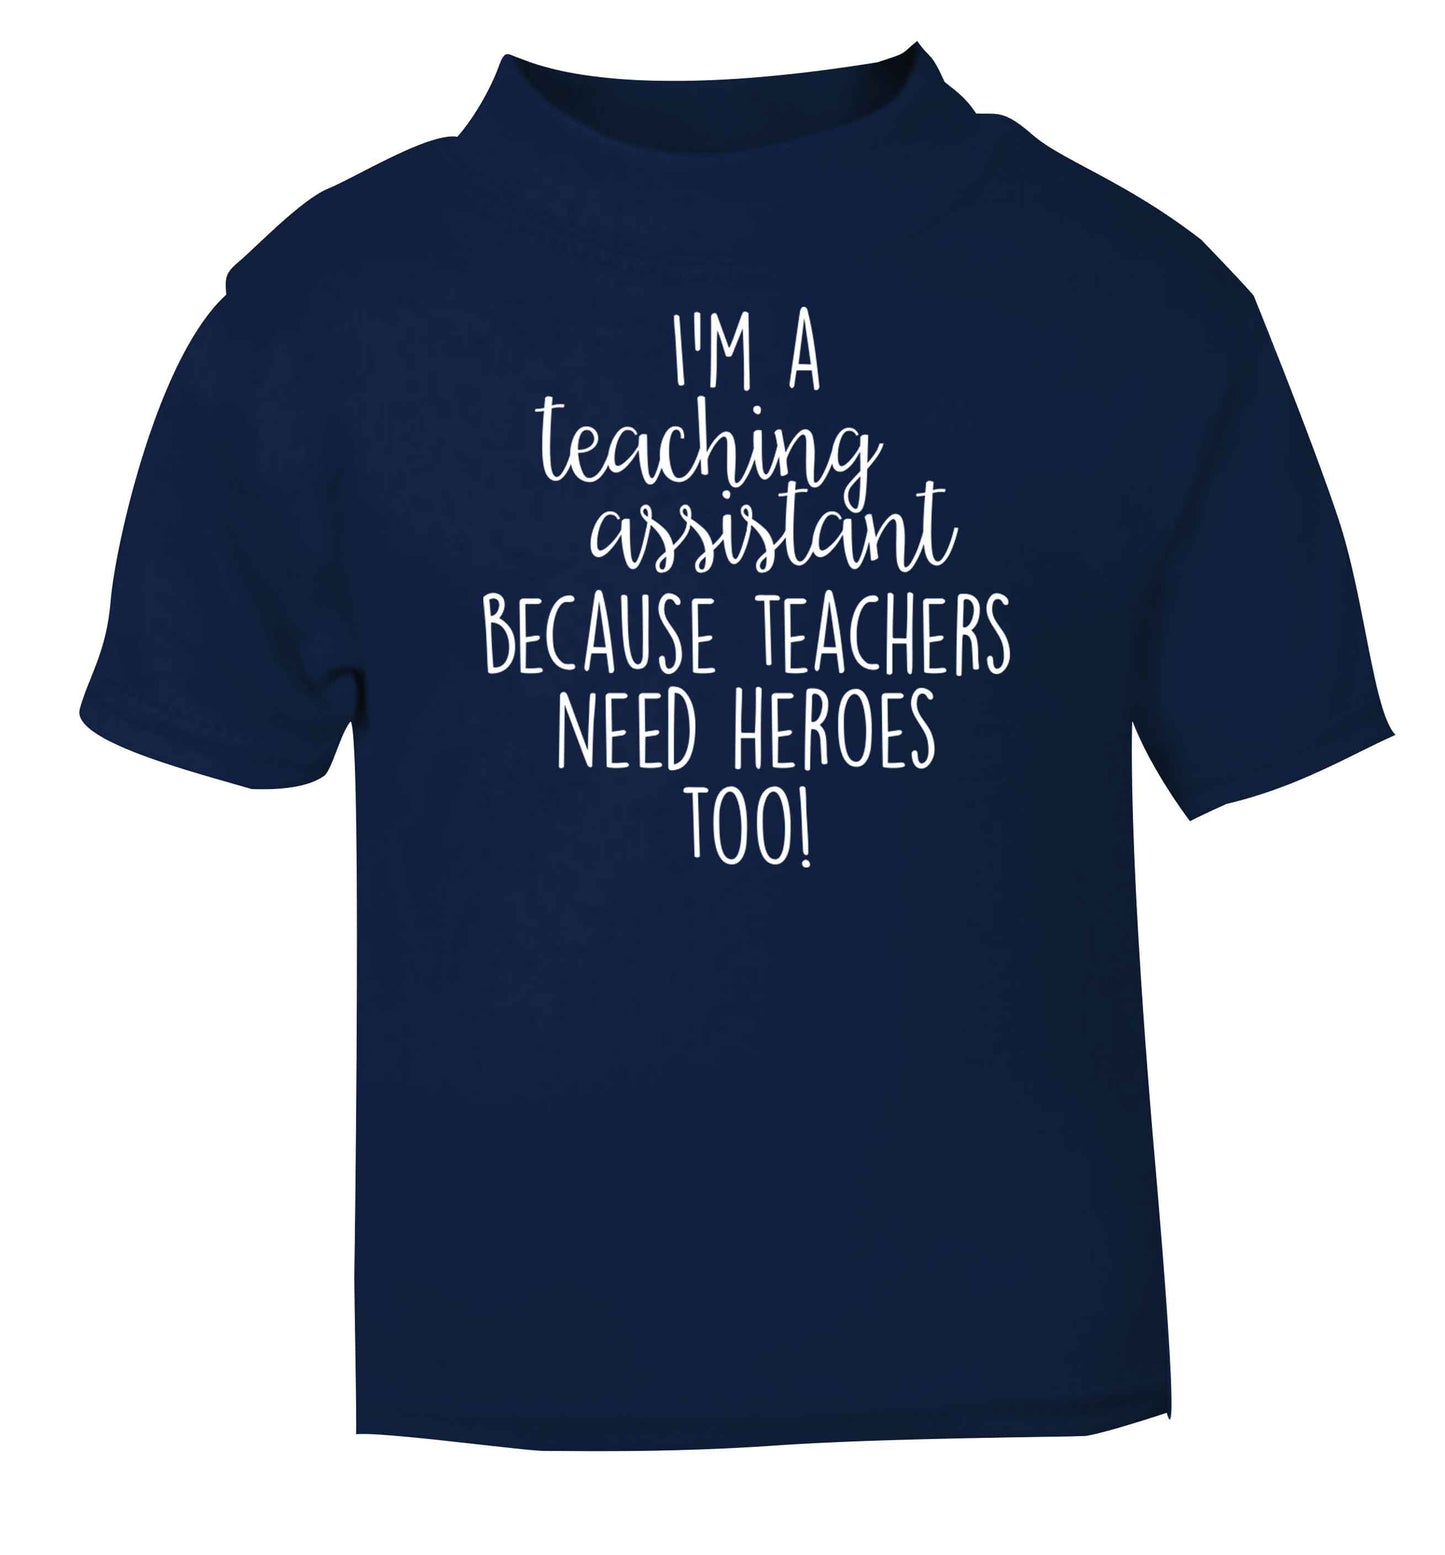 I'm a teaching assistant because teachers need heroes too! navy baby toddler Tshirt 2 Years